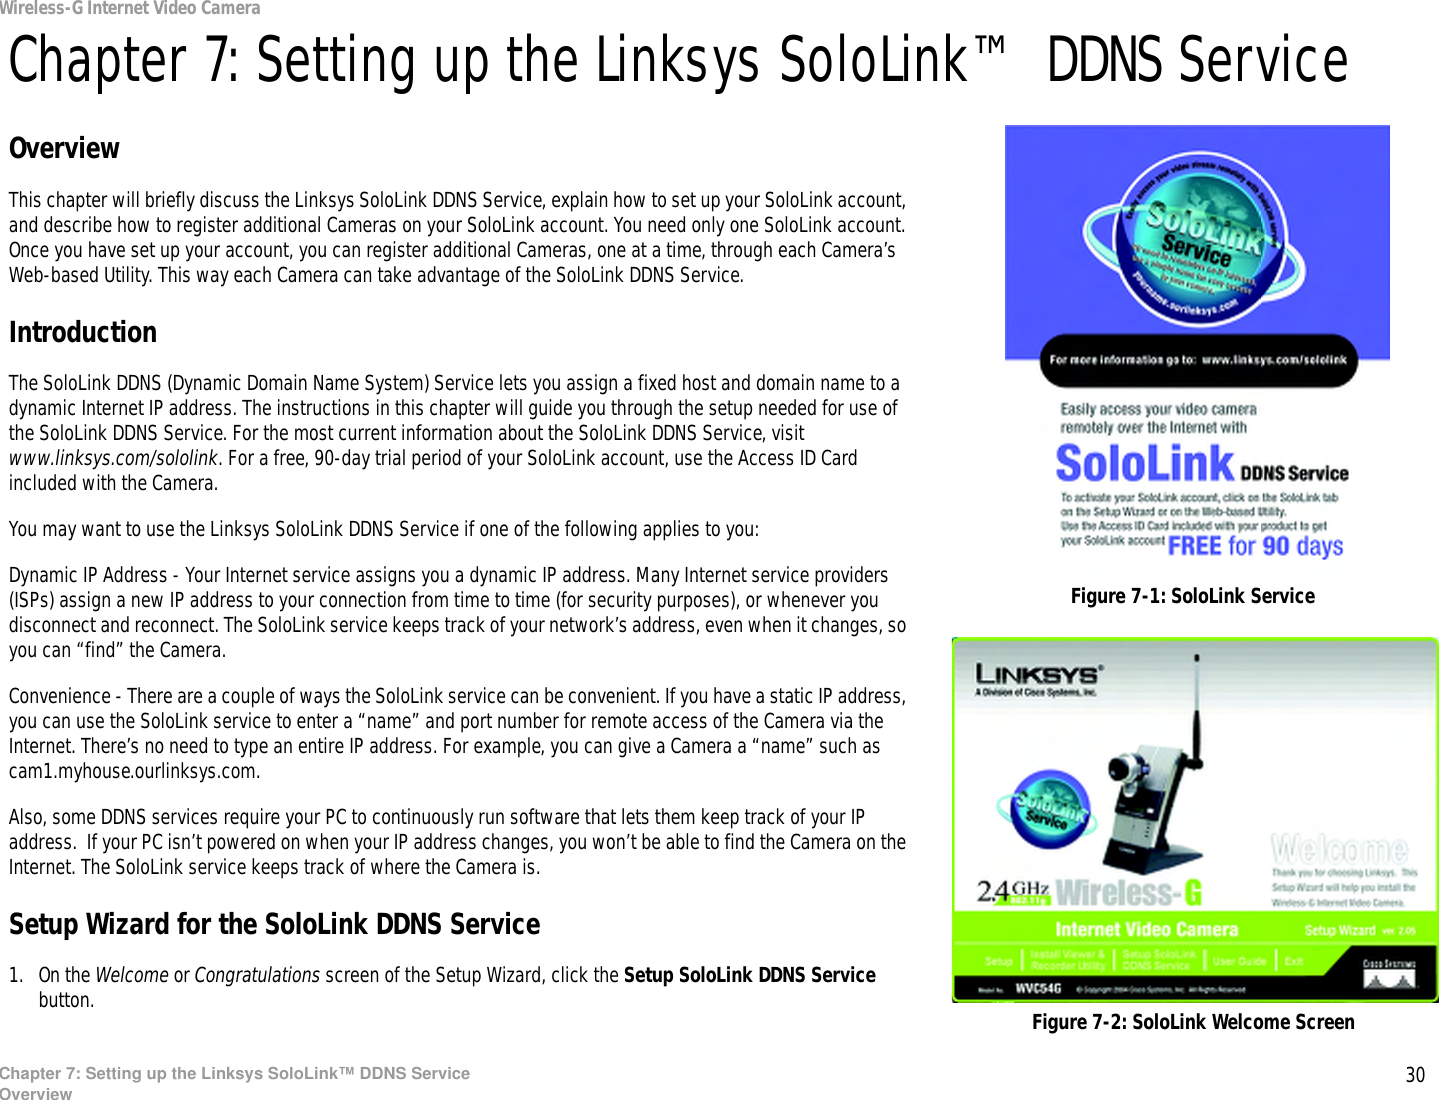 30Chapter 7: Setting up the Linksys SoloLink™ DDNS ServiceOverviewWireless-G Internet Video CameraChapter 7: Setting up the Linksys SoloLink™ DDNS ServiceOverviewThis chapter will briefly discuss the Linksys SoloLink DDNS Service, explain how to set up your SoloLink account, and describe how to register additional Cameras on your SoloLink account. You need only one SoloLink account. Once you have set up your account, you can register additional Cameras, one at a time, through each Camera’s Web-based Utility. This way each Camera can take advantage of the SoloLink DDNS Service.IntroductionThe SoloLink DDNS (Dynamic Domain Name System) Service lets you assign a fixed host and domain name to a dynamic Internet IP address. The instructions in this chapter will guide you through the setup needed for use of the SoloLink DDNS Service. For the most current information about the SoloLink DDNS Service, visit www.linksys.com/sololink. For a free, 90-day trial period of your SoloLink account, use the Access ID Card included with the Camera.You may want to use the Linksys SoloLink DDNS Service if one of the following applies to you:Dynamic IP Address - Your Internet service assigns you a dynamic IP address. Many Internet service providers (ISPs) assign a new IP address to your connection from time to time (for security purposes), or whenever you disconnect and reconnect. The SoloLink service keeps track of your network’s address, even when it changes, so you can “find” the Camera.Convenience - There are a couple of ways the SoloLink service can be convenient. If you have a static IP address, you can use the SoloLink service to enter a “name” and port number for remote access of the Camera via the Internet. There’s no need to type an entire IP address. For example, you can give a Camera a “name” such as cam1.myhouse.ourlinksys.com.Also, some DDNS services require your PC to continuously run software that lets them keep track of your IP address.  If your PC isn’t powered on when your IP address changes, you won’t be able to find the Camera on the Internet. The SoloLink service keeps track of where the Camera is.Setup Wizard for the SoloLink DDNS Service1. On the Welcome or Congratulations screen of the Setup Wizard, click the Setup SoloLink DDNS Service button.  Figure 7-2: SoloLink Welcome ScreenFigure 7-1: SoloLink Service